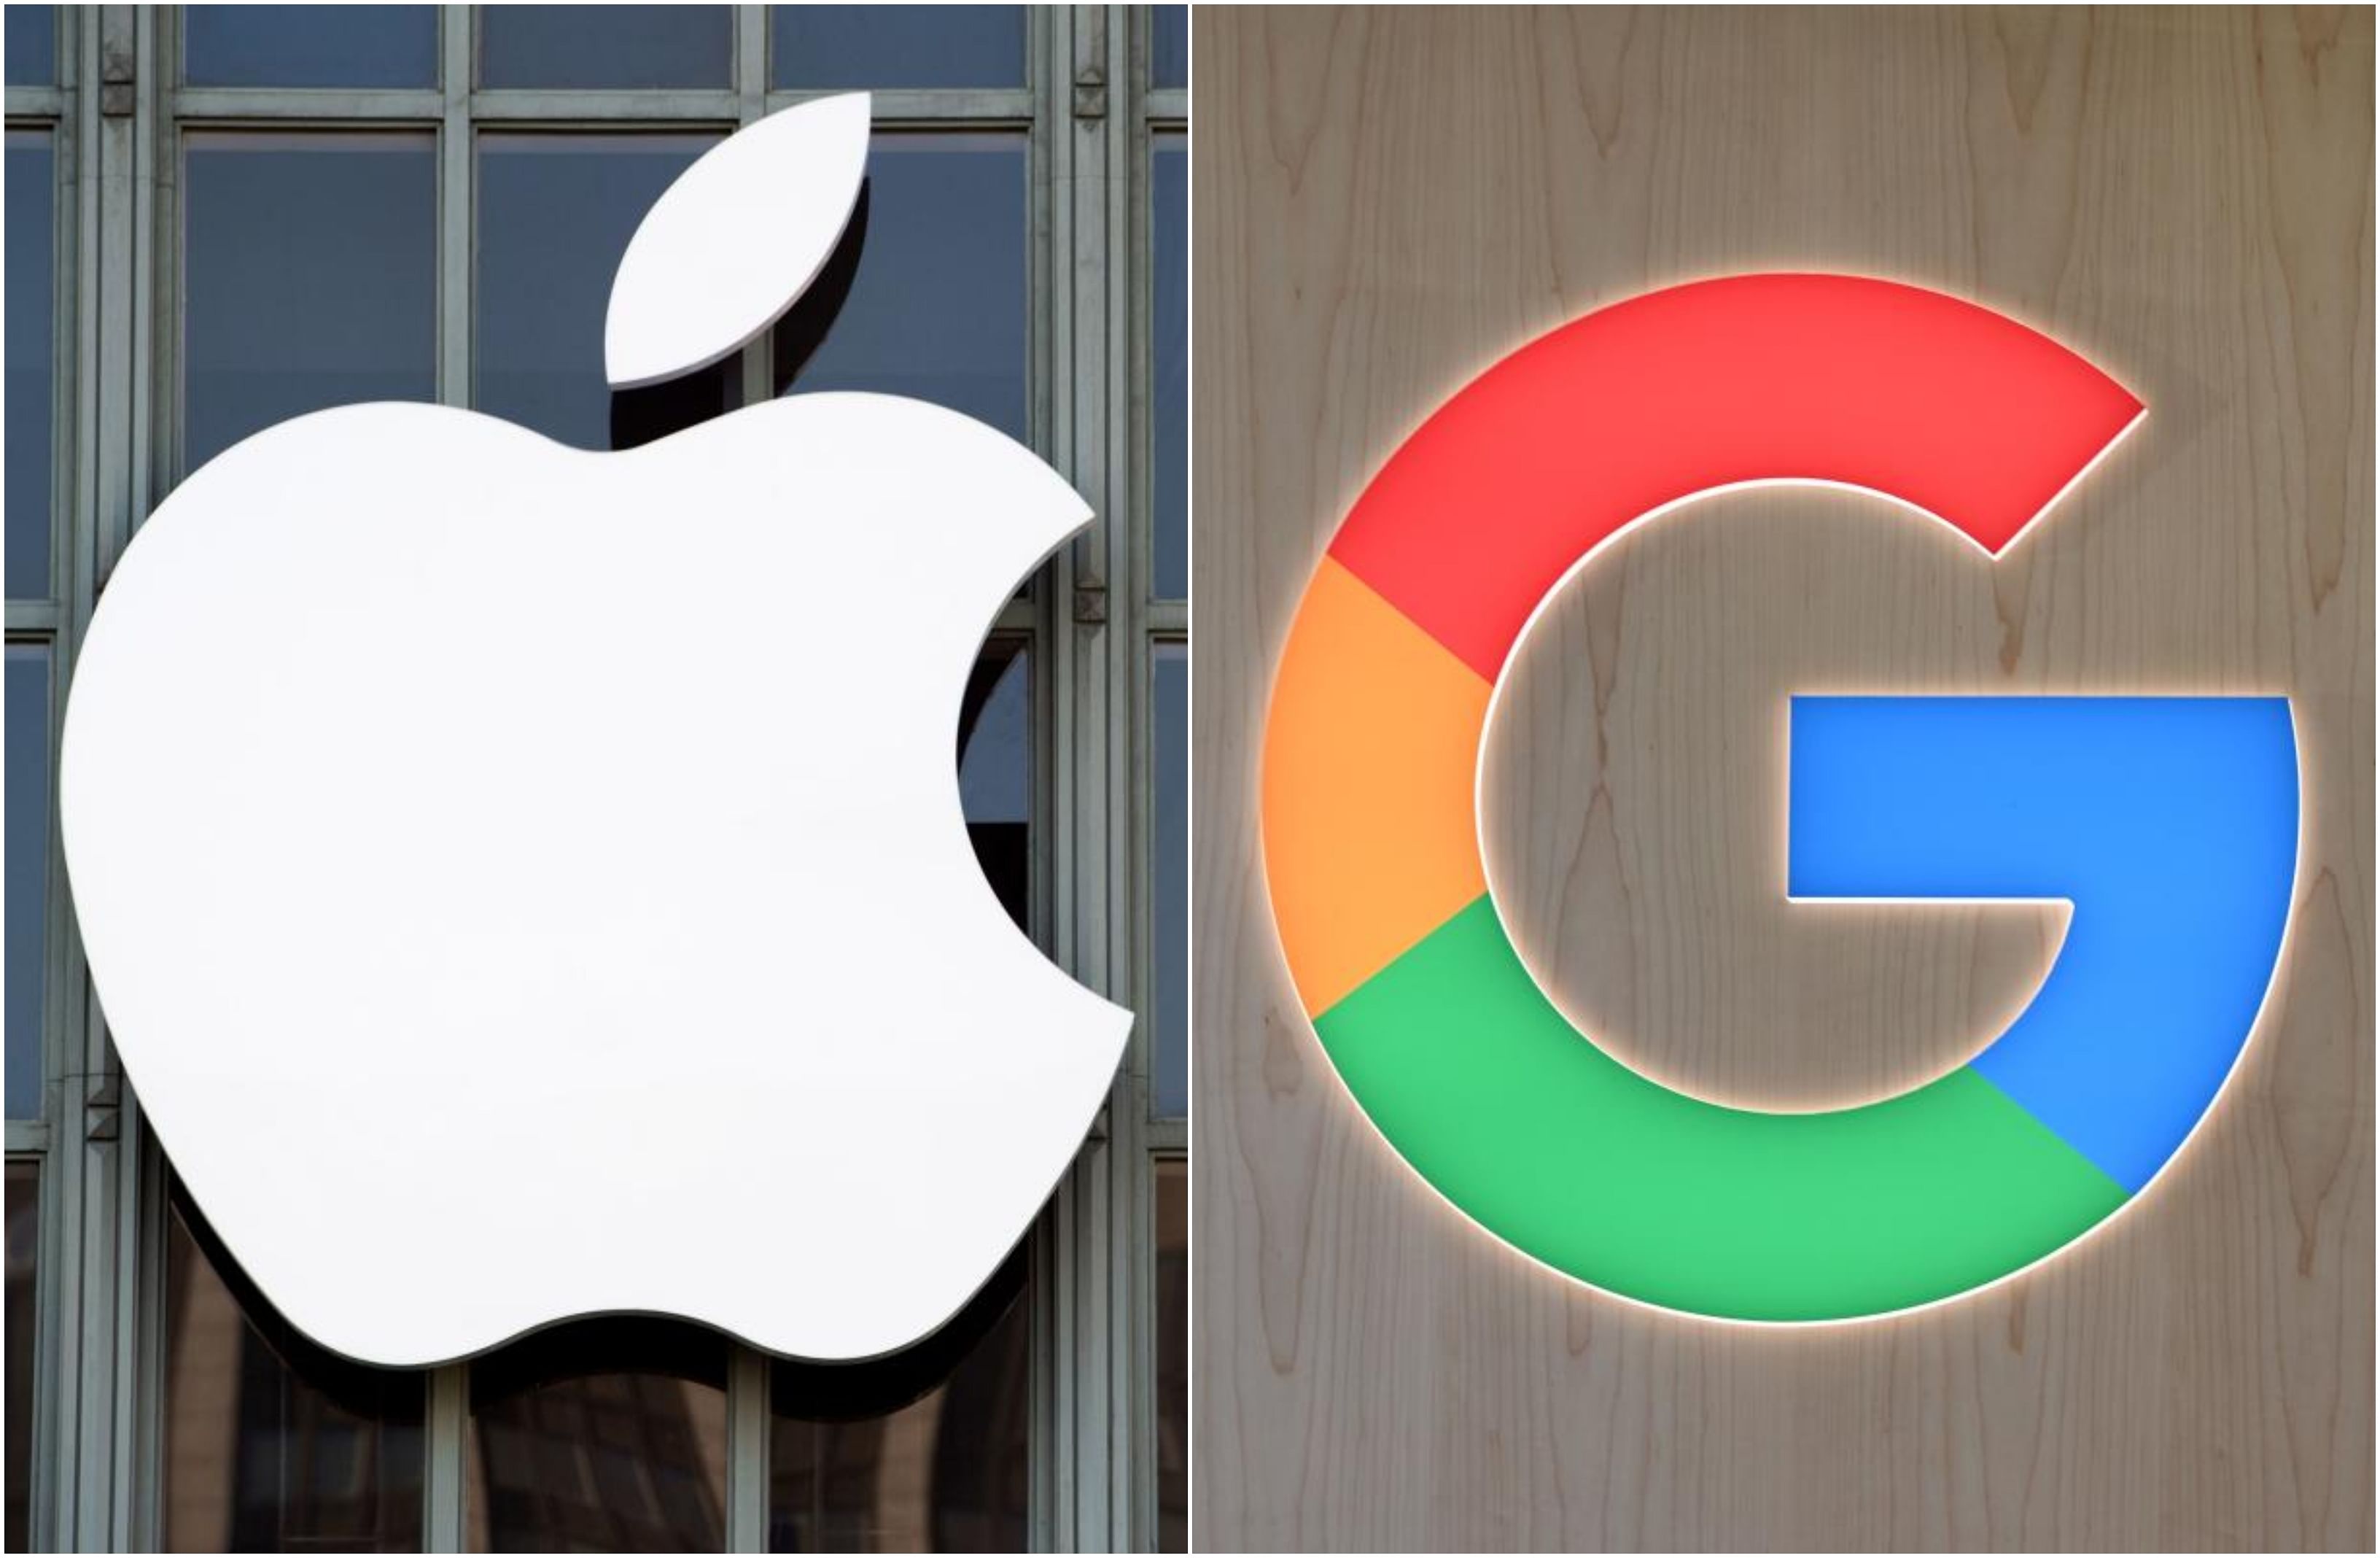 Last month, Apple and Google had said they will launch a comprehensive solution that includes application programming interfaces (APIs) and operating system-level technology to assist in enabling contact tracing.